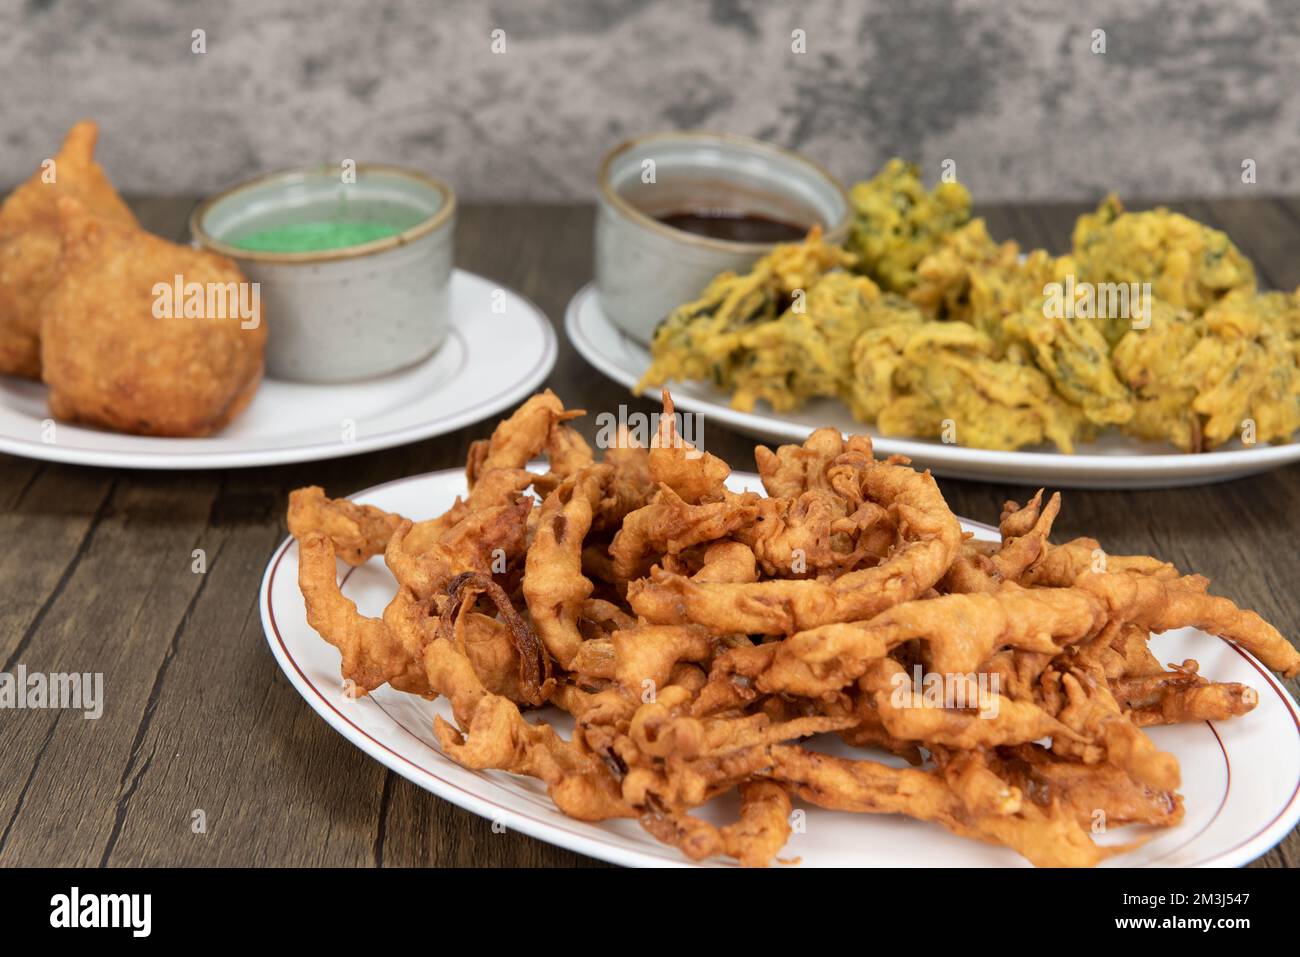 Table feast of some traditional Indian cuisine plates with the crispy onion bhaji featured up front. Stock Photo